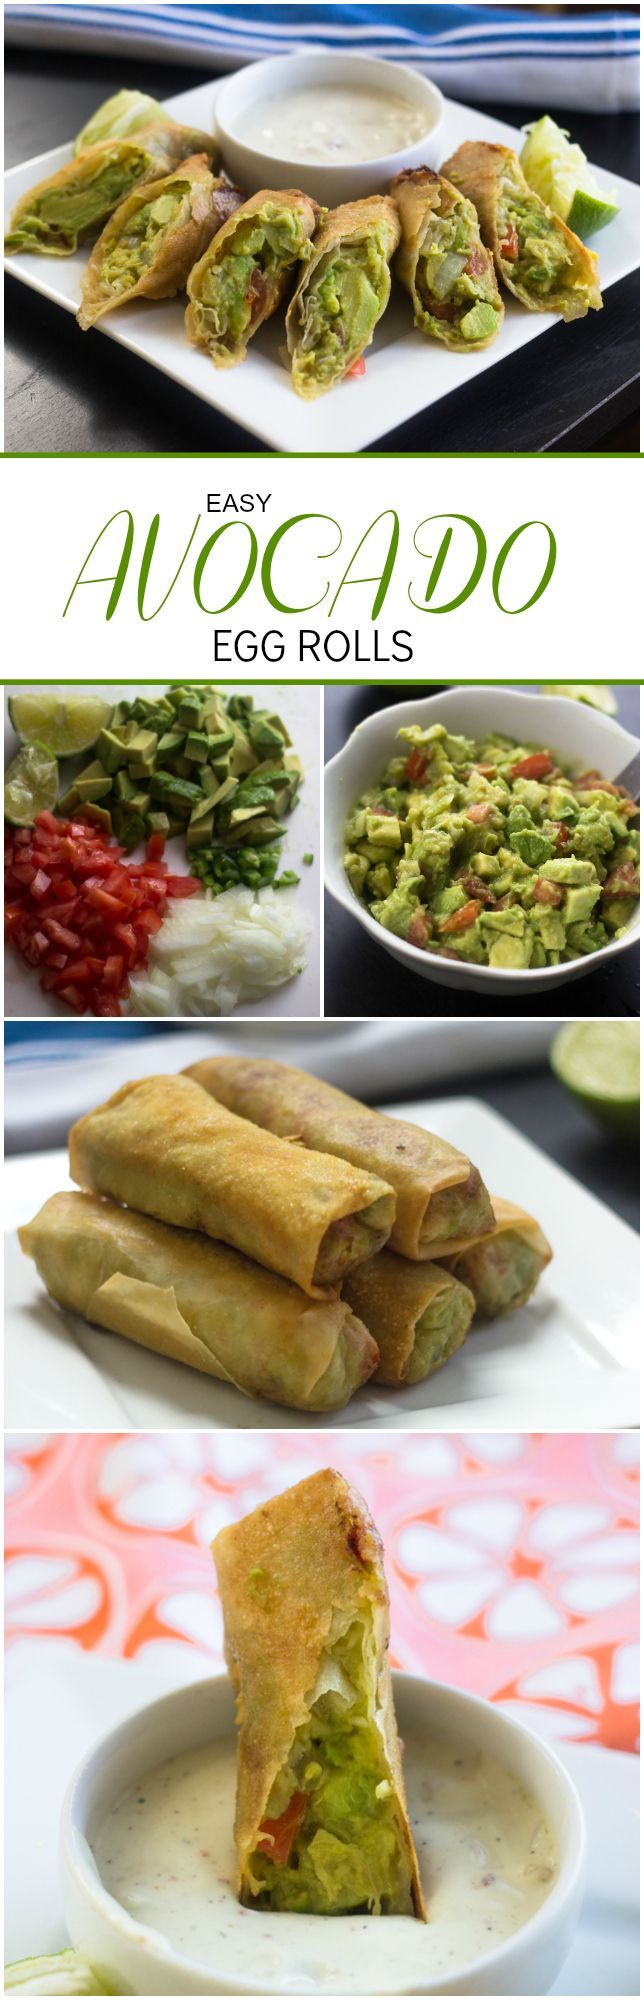 Easy Avocado Egg Rolls just like the cheesecake factory except 1000x better!!